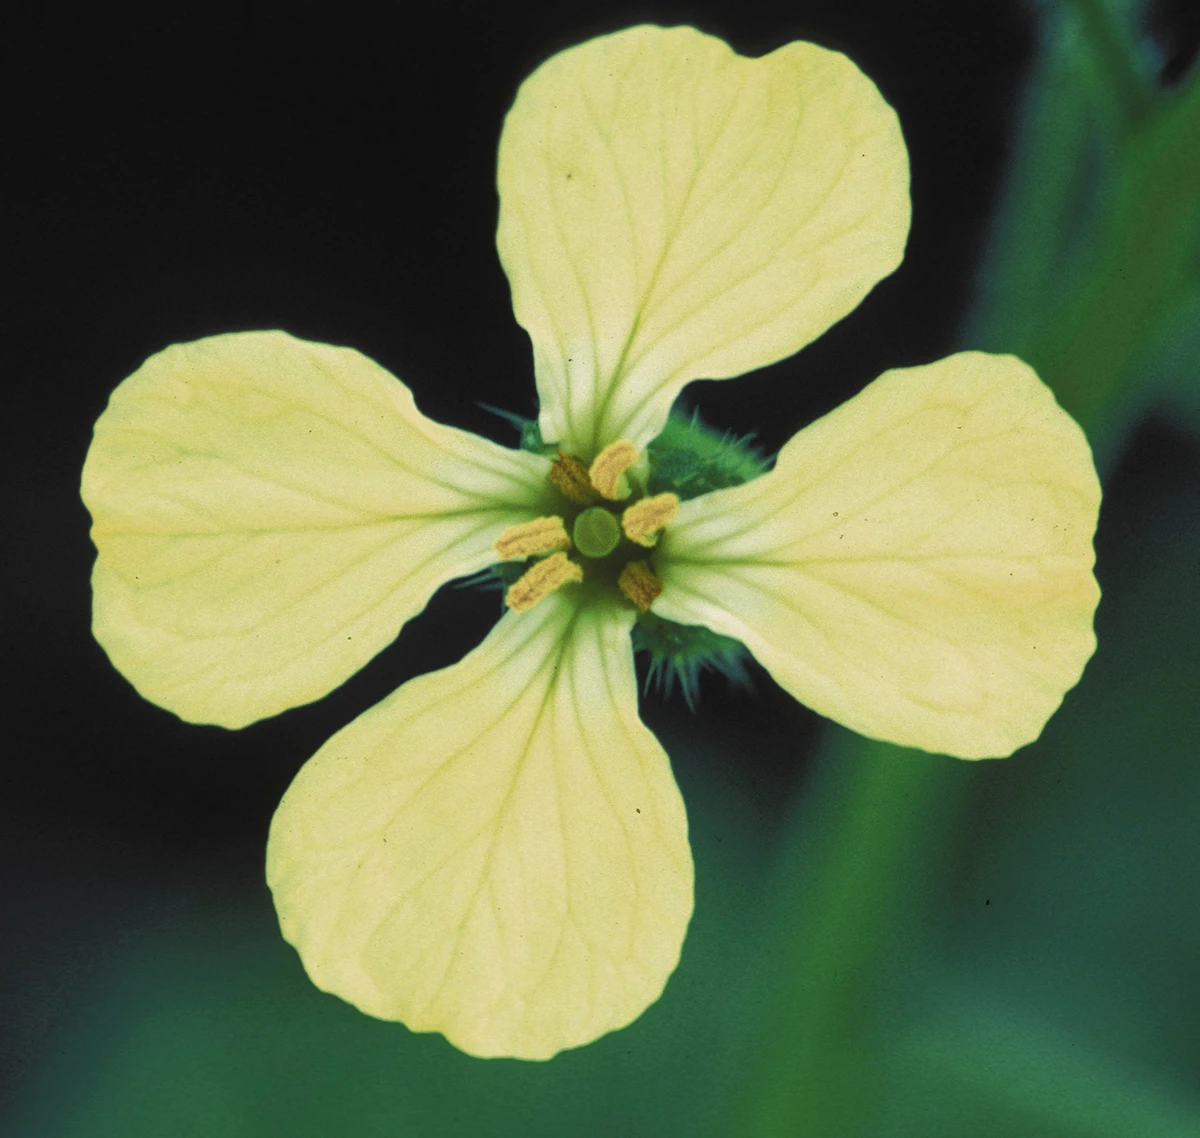 The flowers of wild radish have four white petals and six stamens at their center.